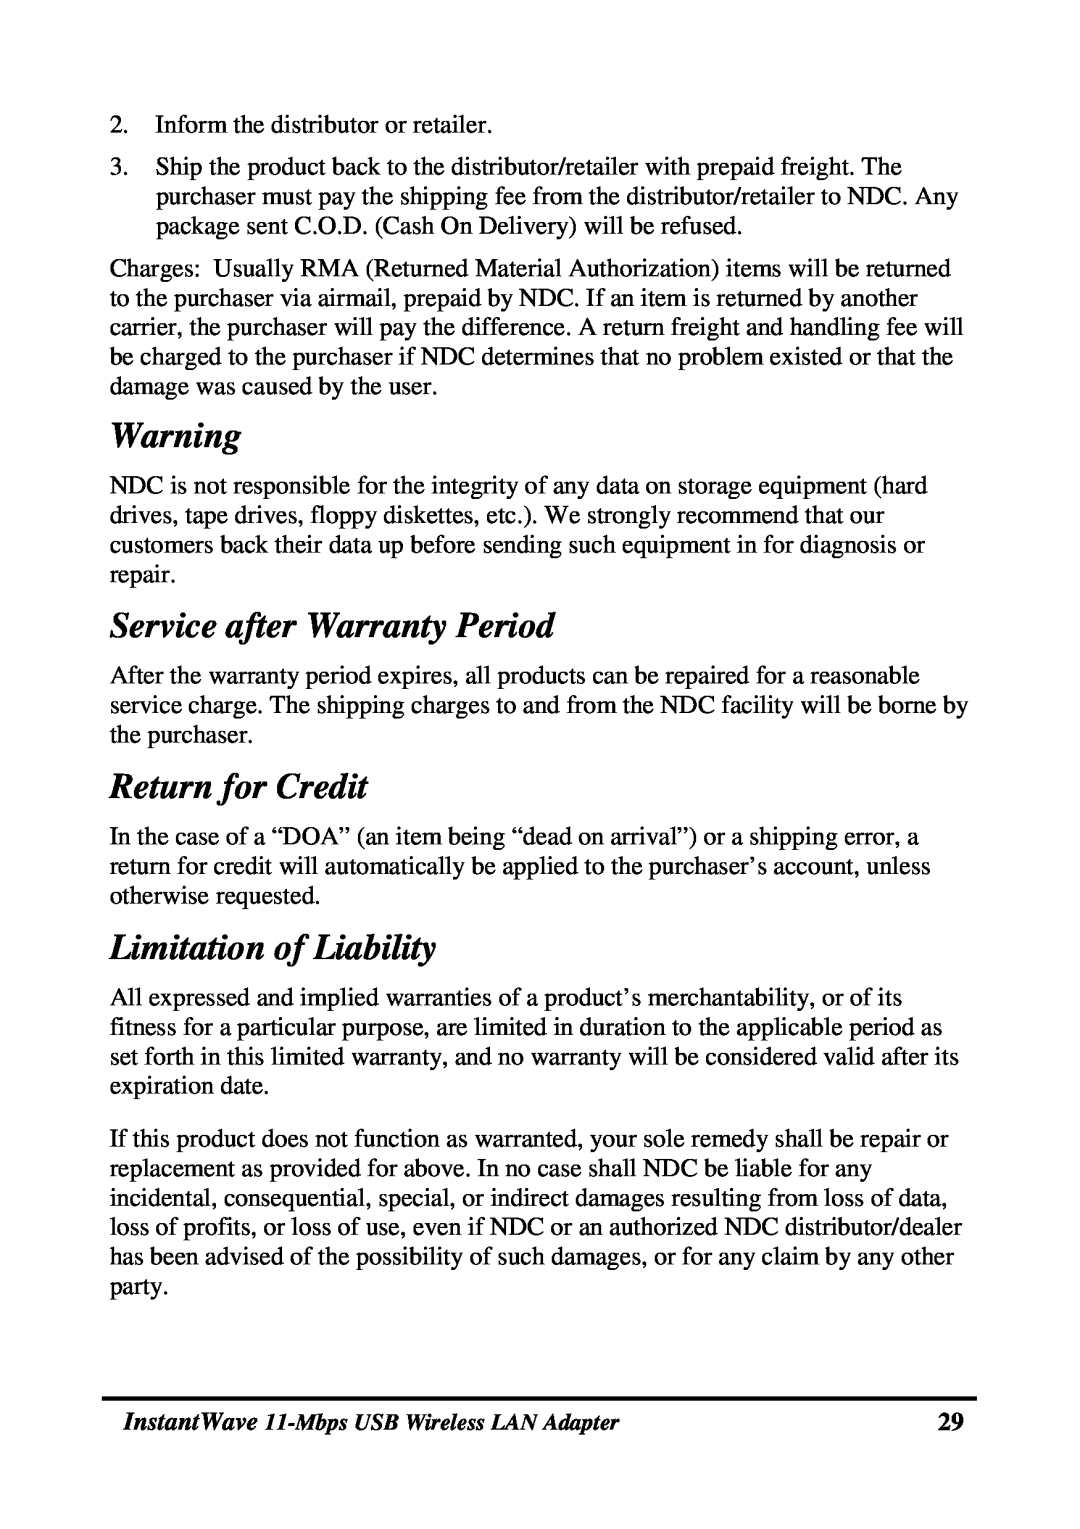 NDC comm NWH4020 manual Service after Warranty Period, Return for Credit, Limitation of Liability 